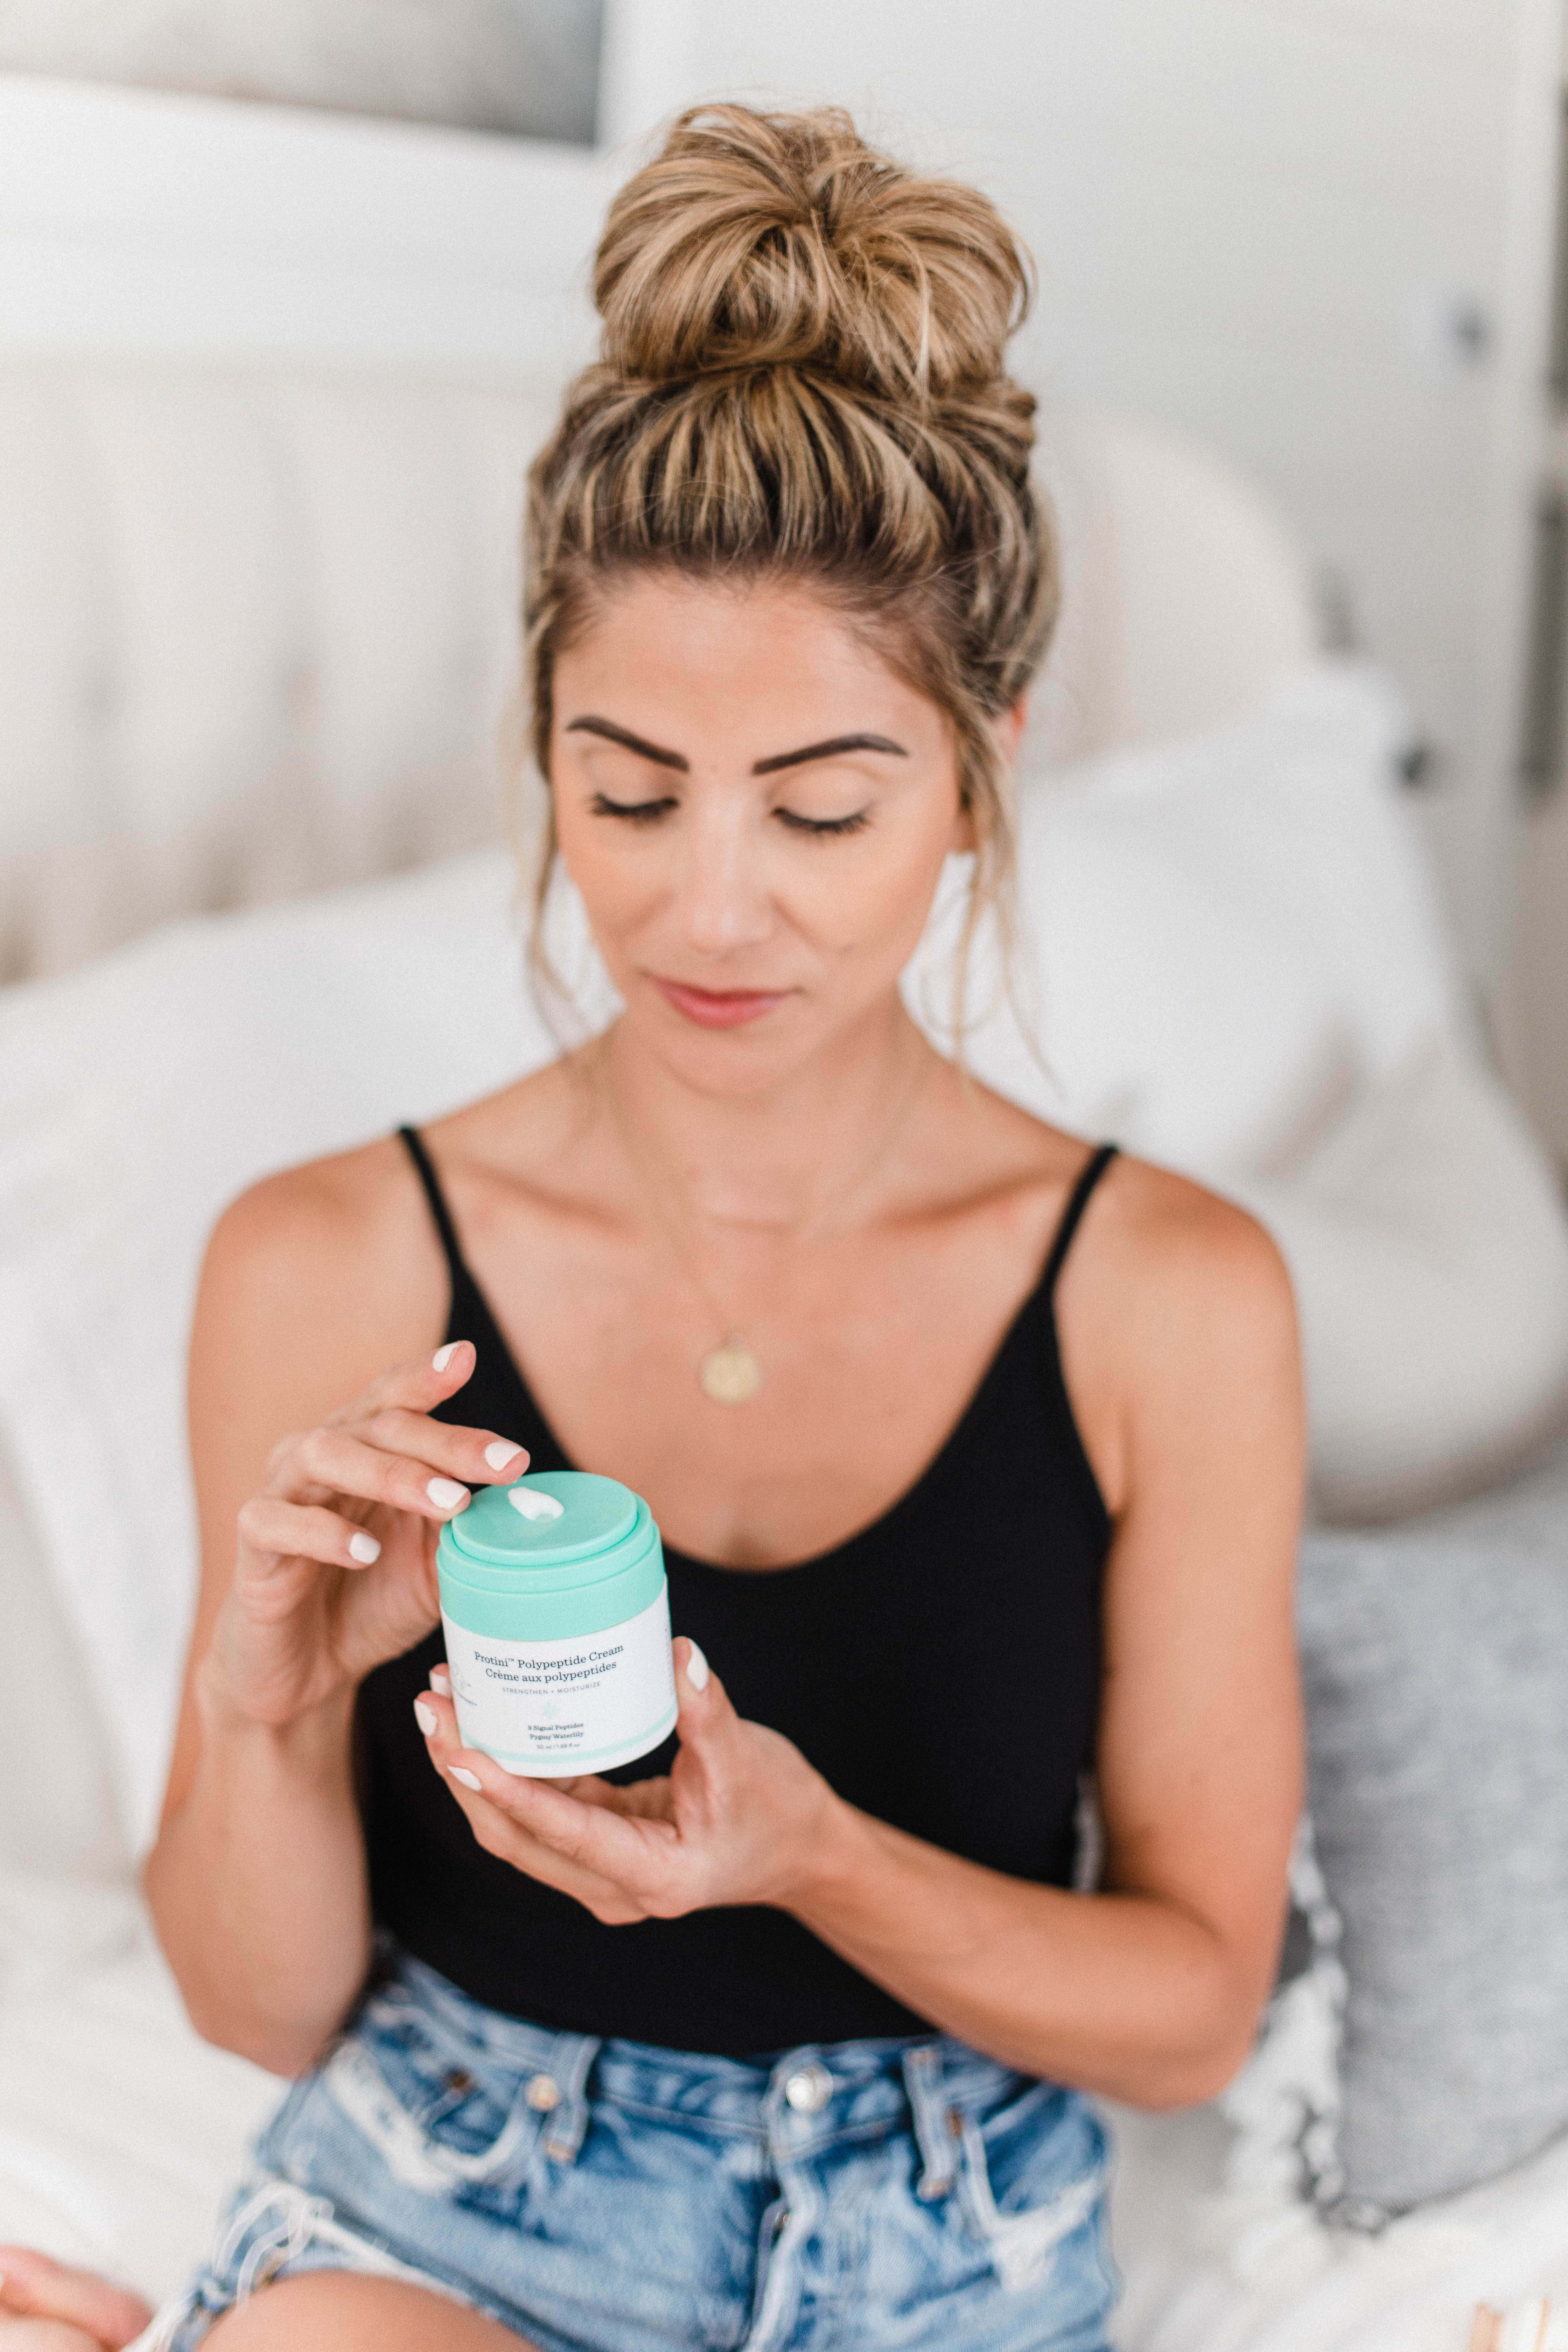 Connecticut life and style blogger Lauren McBride shares her Sephora Summer Bonus Event picks for skincare, makeup, and haircare.